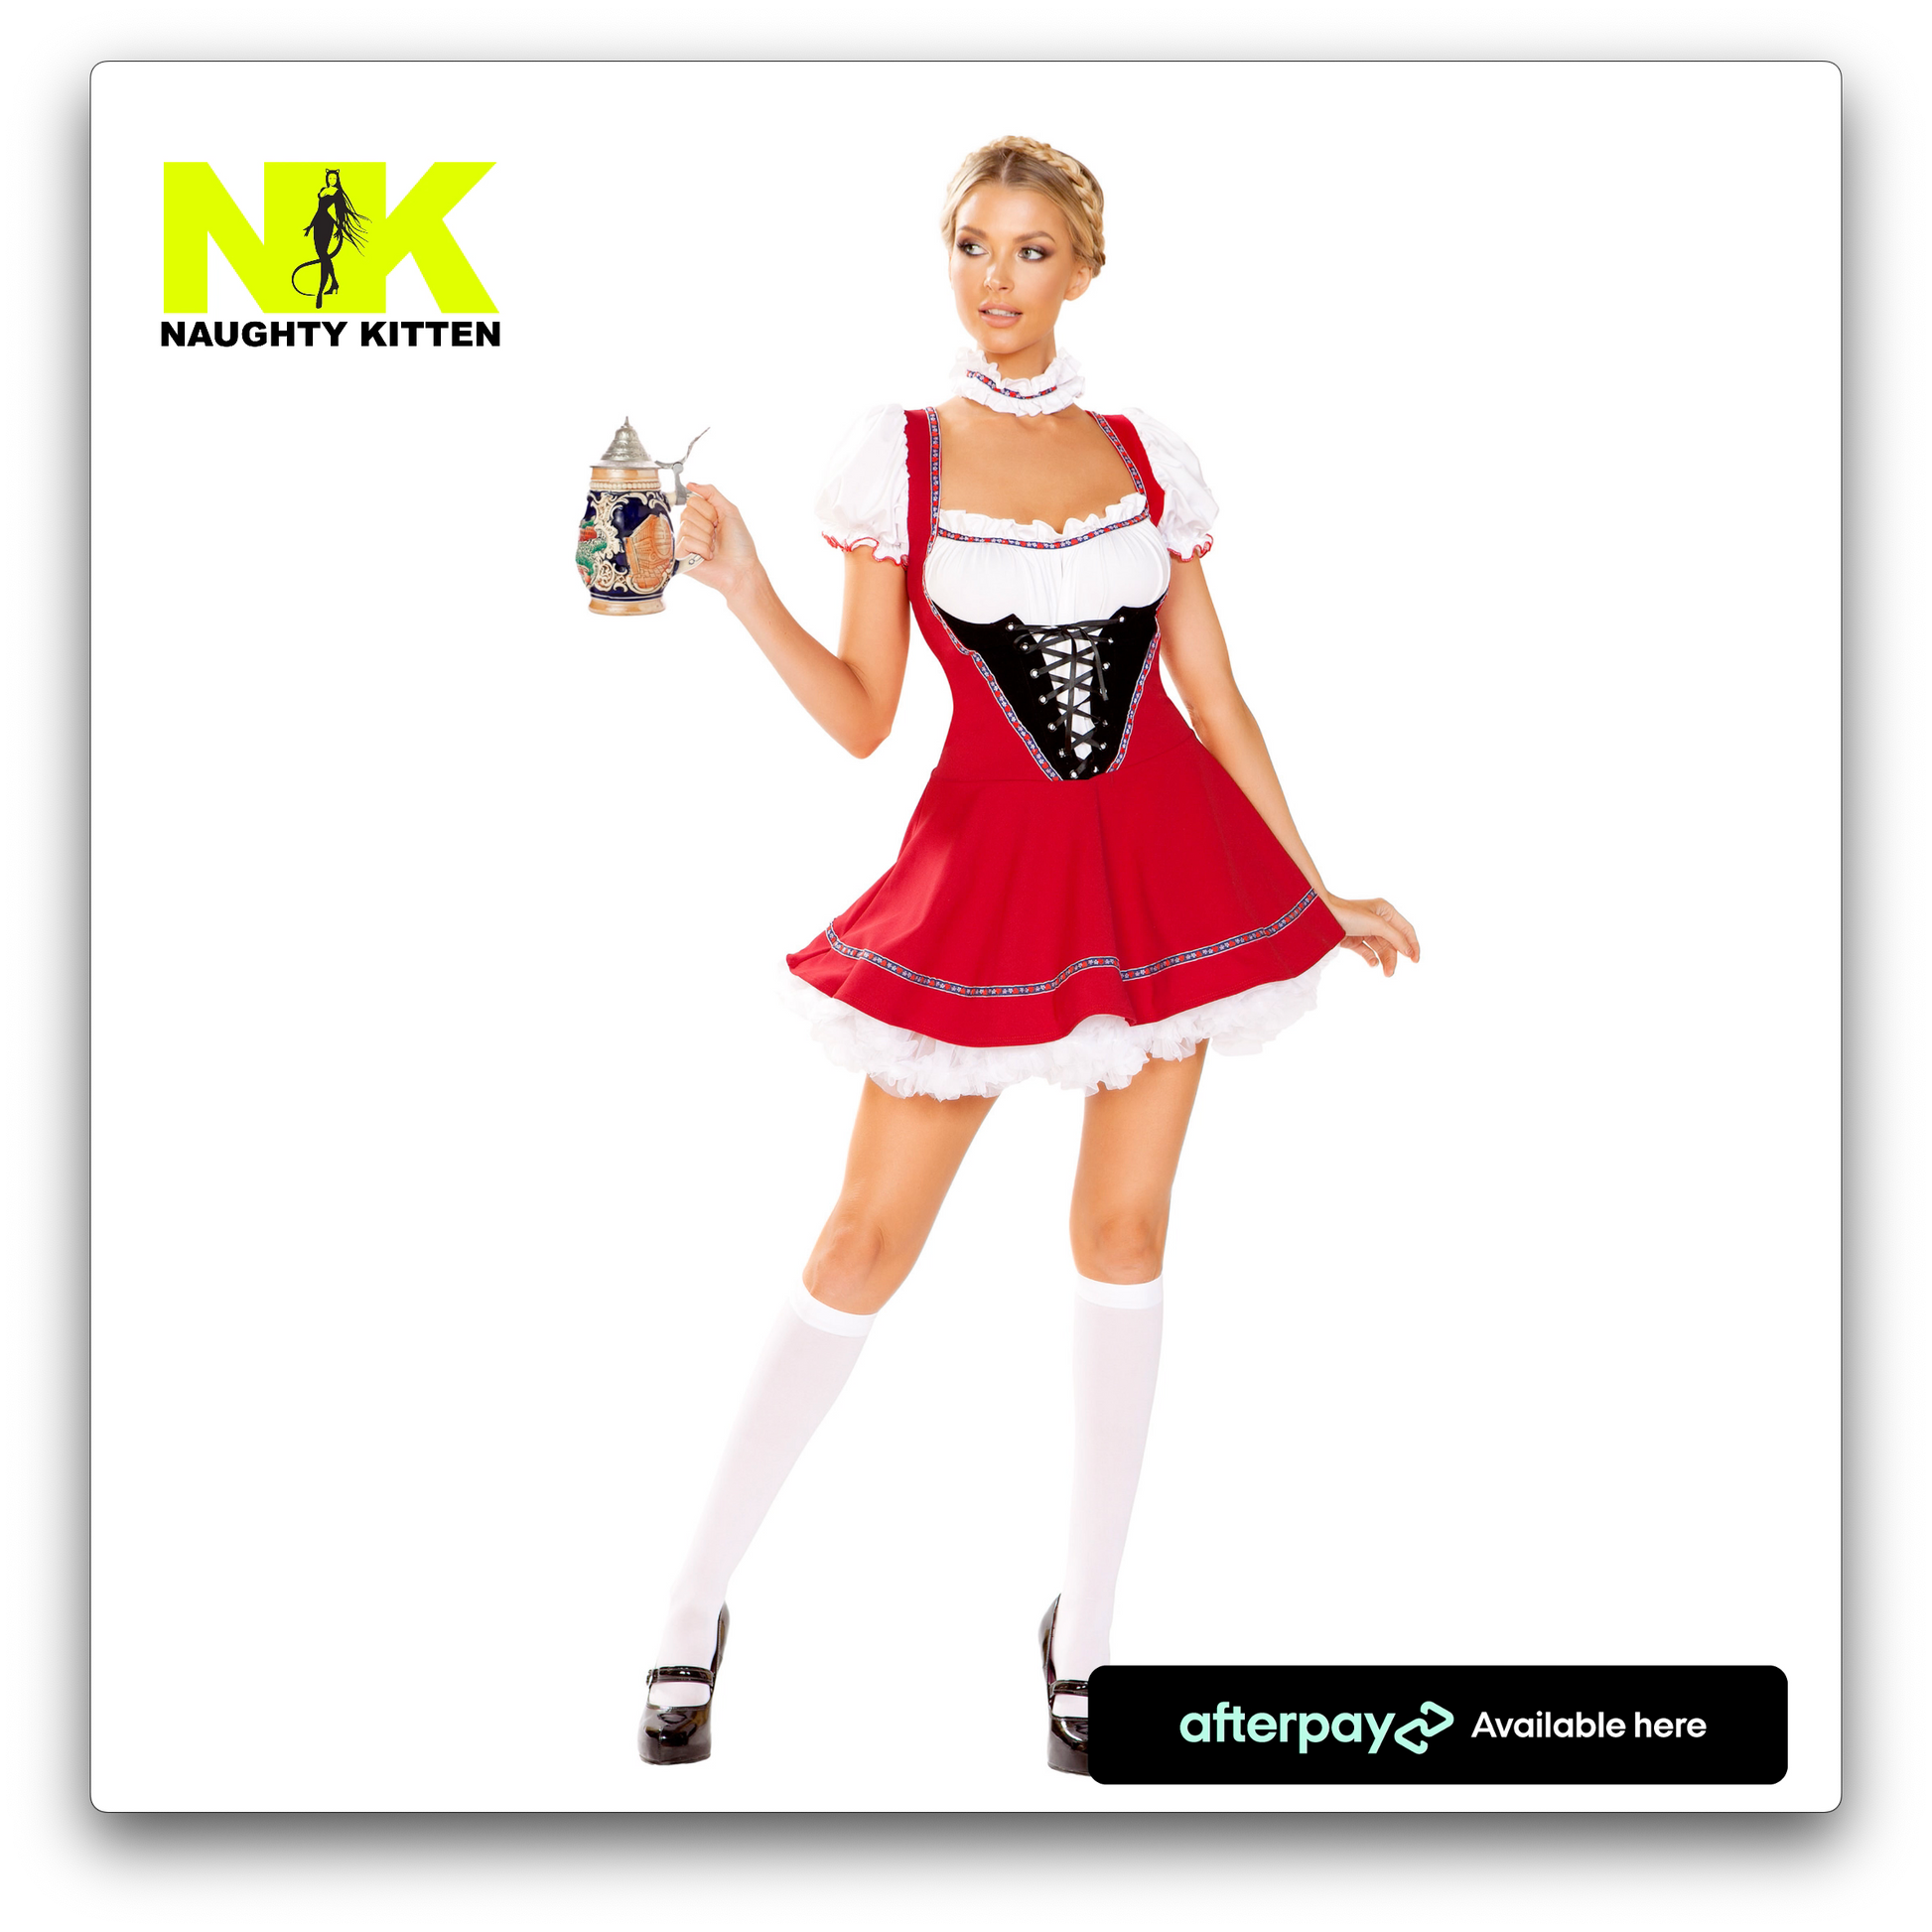 Beer Wench Costume - Naughty Kitten Clothing Front View Oktoberfest Costume Halloween Costume